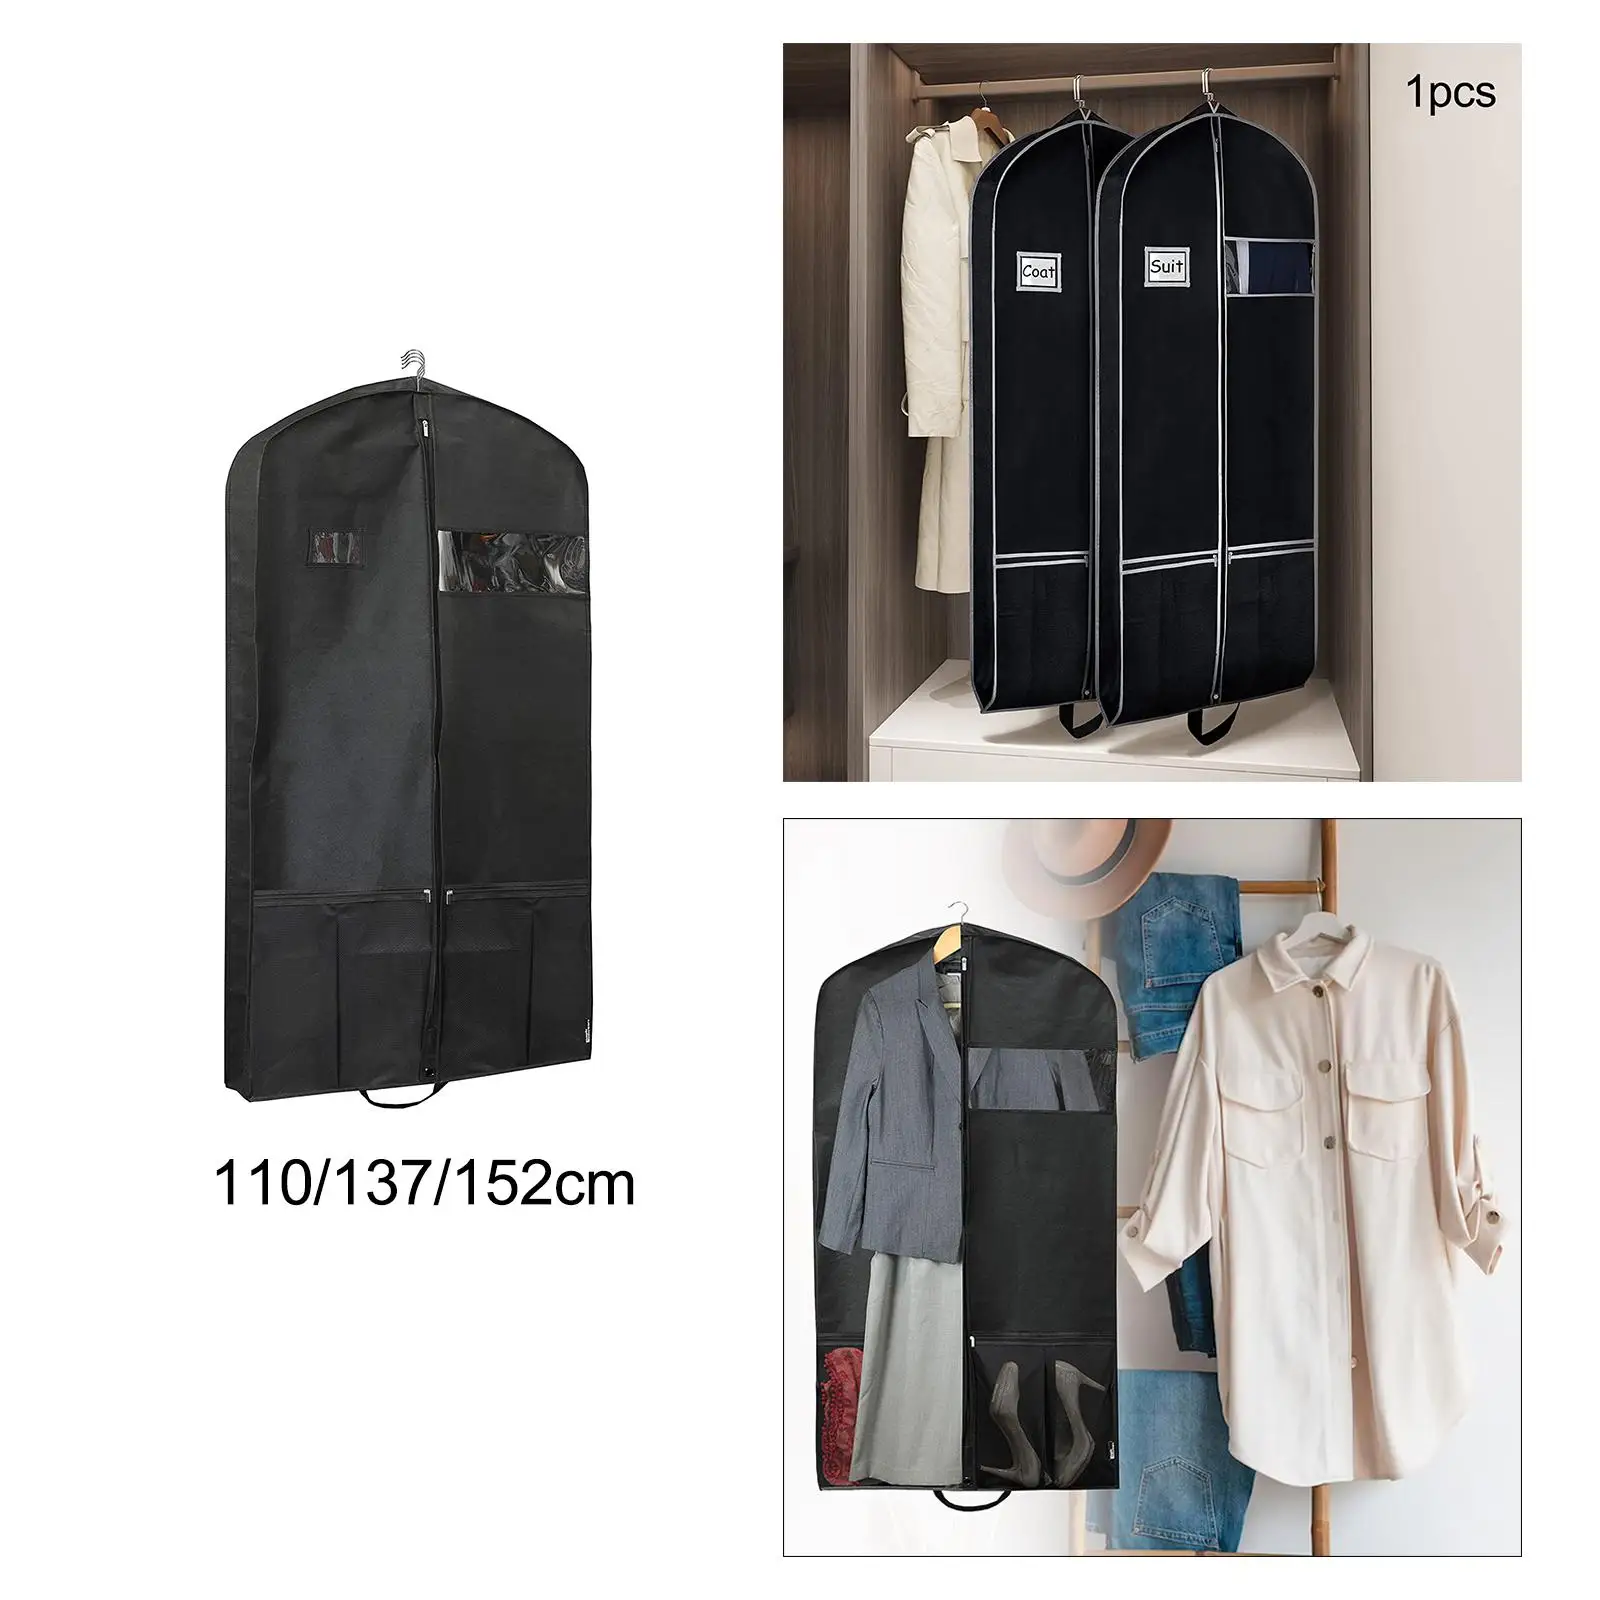 Garment Bag 2 Extra Pocket Coat Covers Non Woven Fabric Thin and Lightweight for Travel Accessories Water Resistance Suit Bag